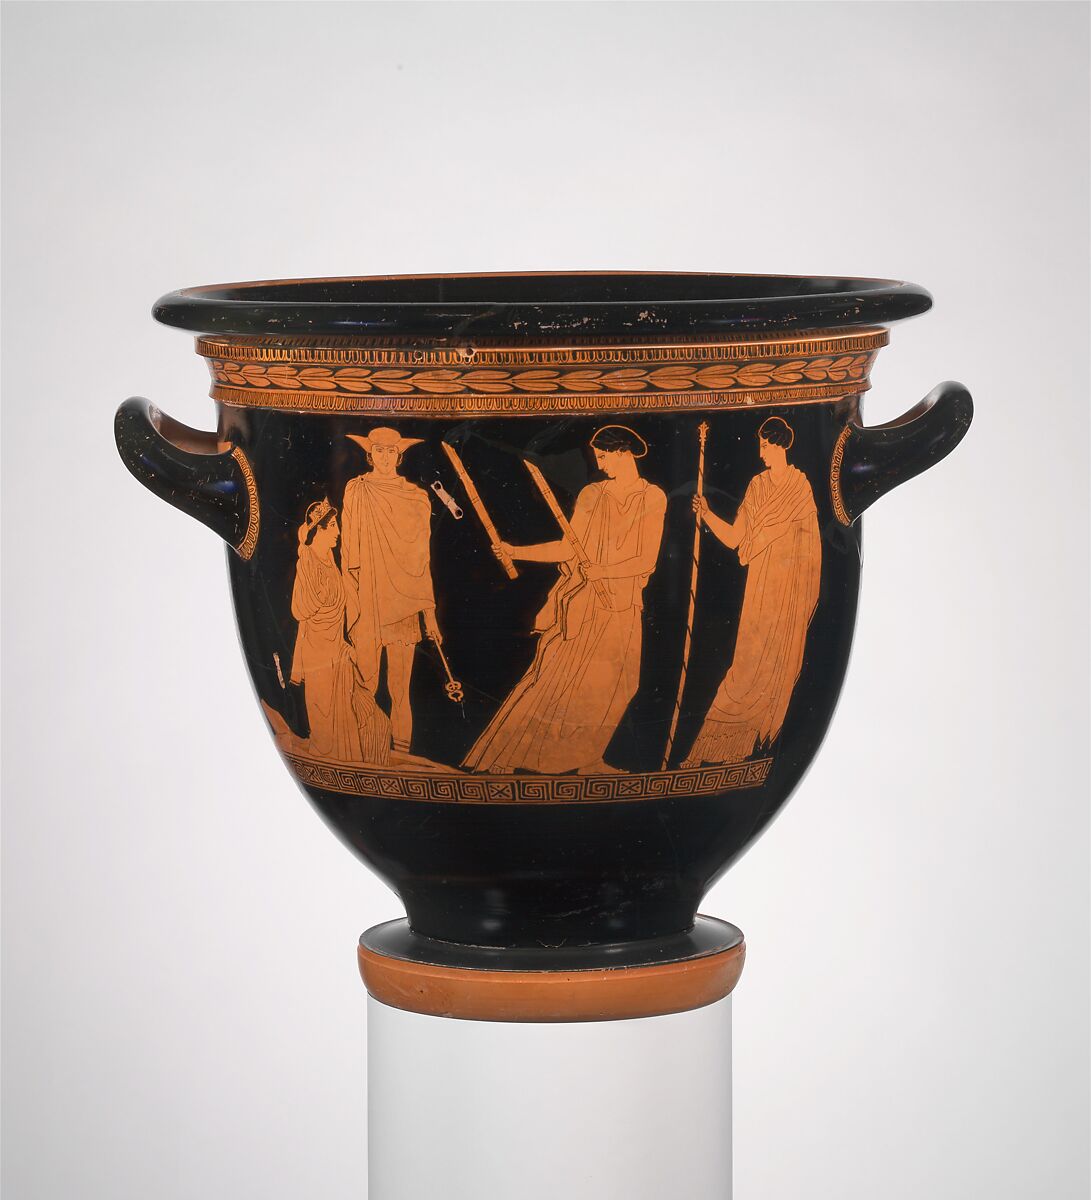 Terracotta bell-krater (bowl for mixing wine and water), Attributed to the Persephone Painter, Terracotta, Greek, Attic 